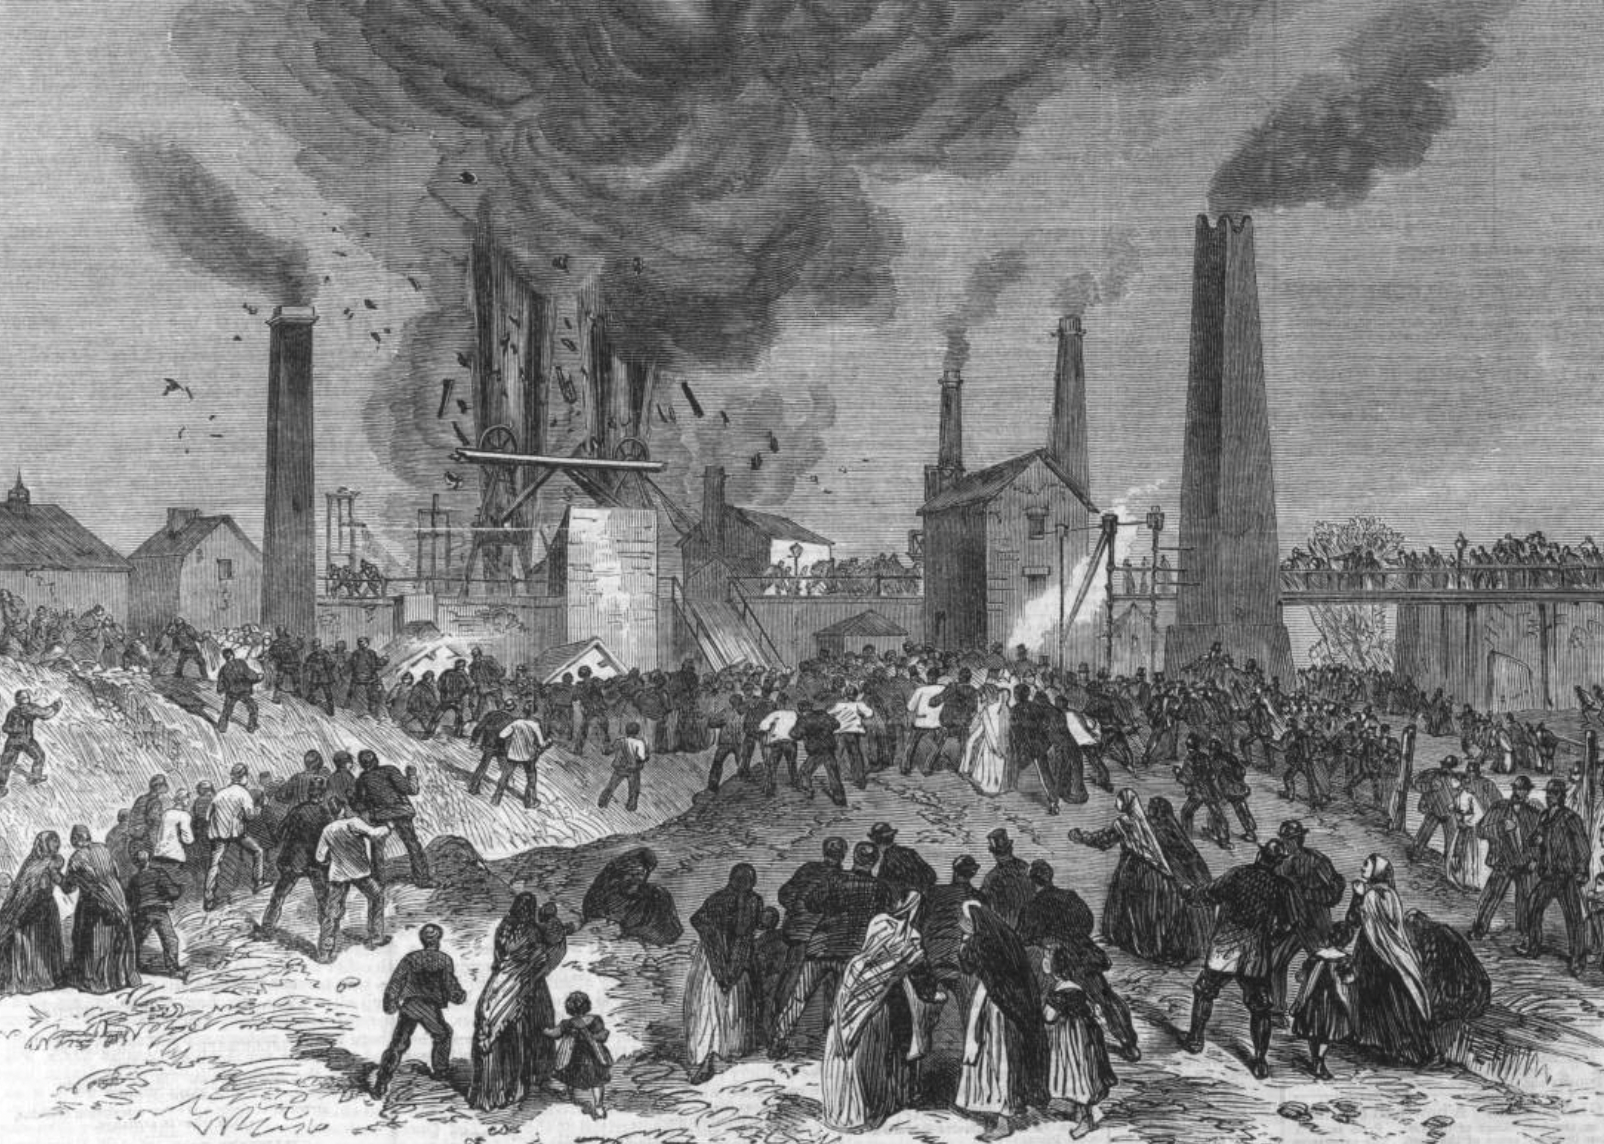 Illustration of the Second Explosion at the Oaks Colliery.